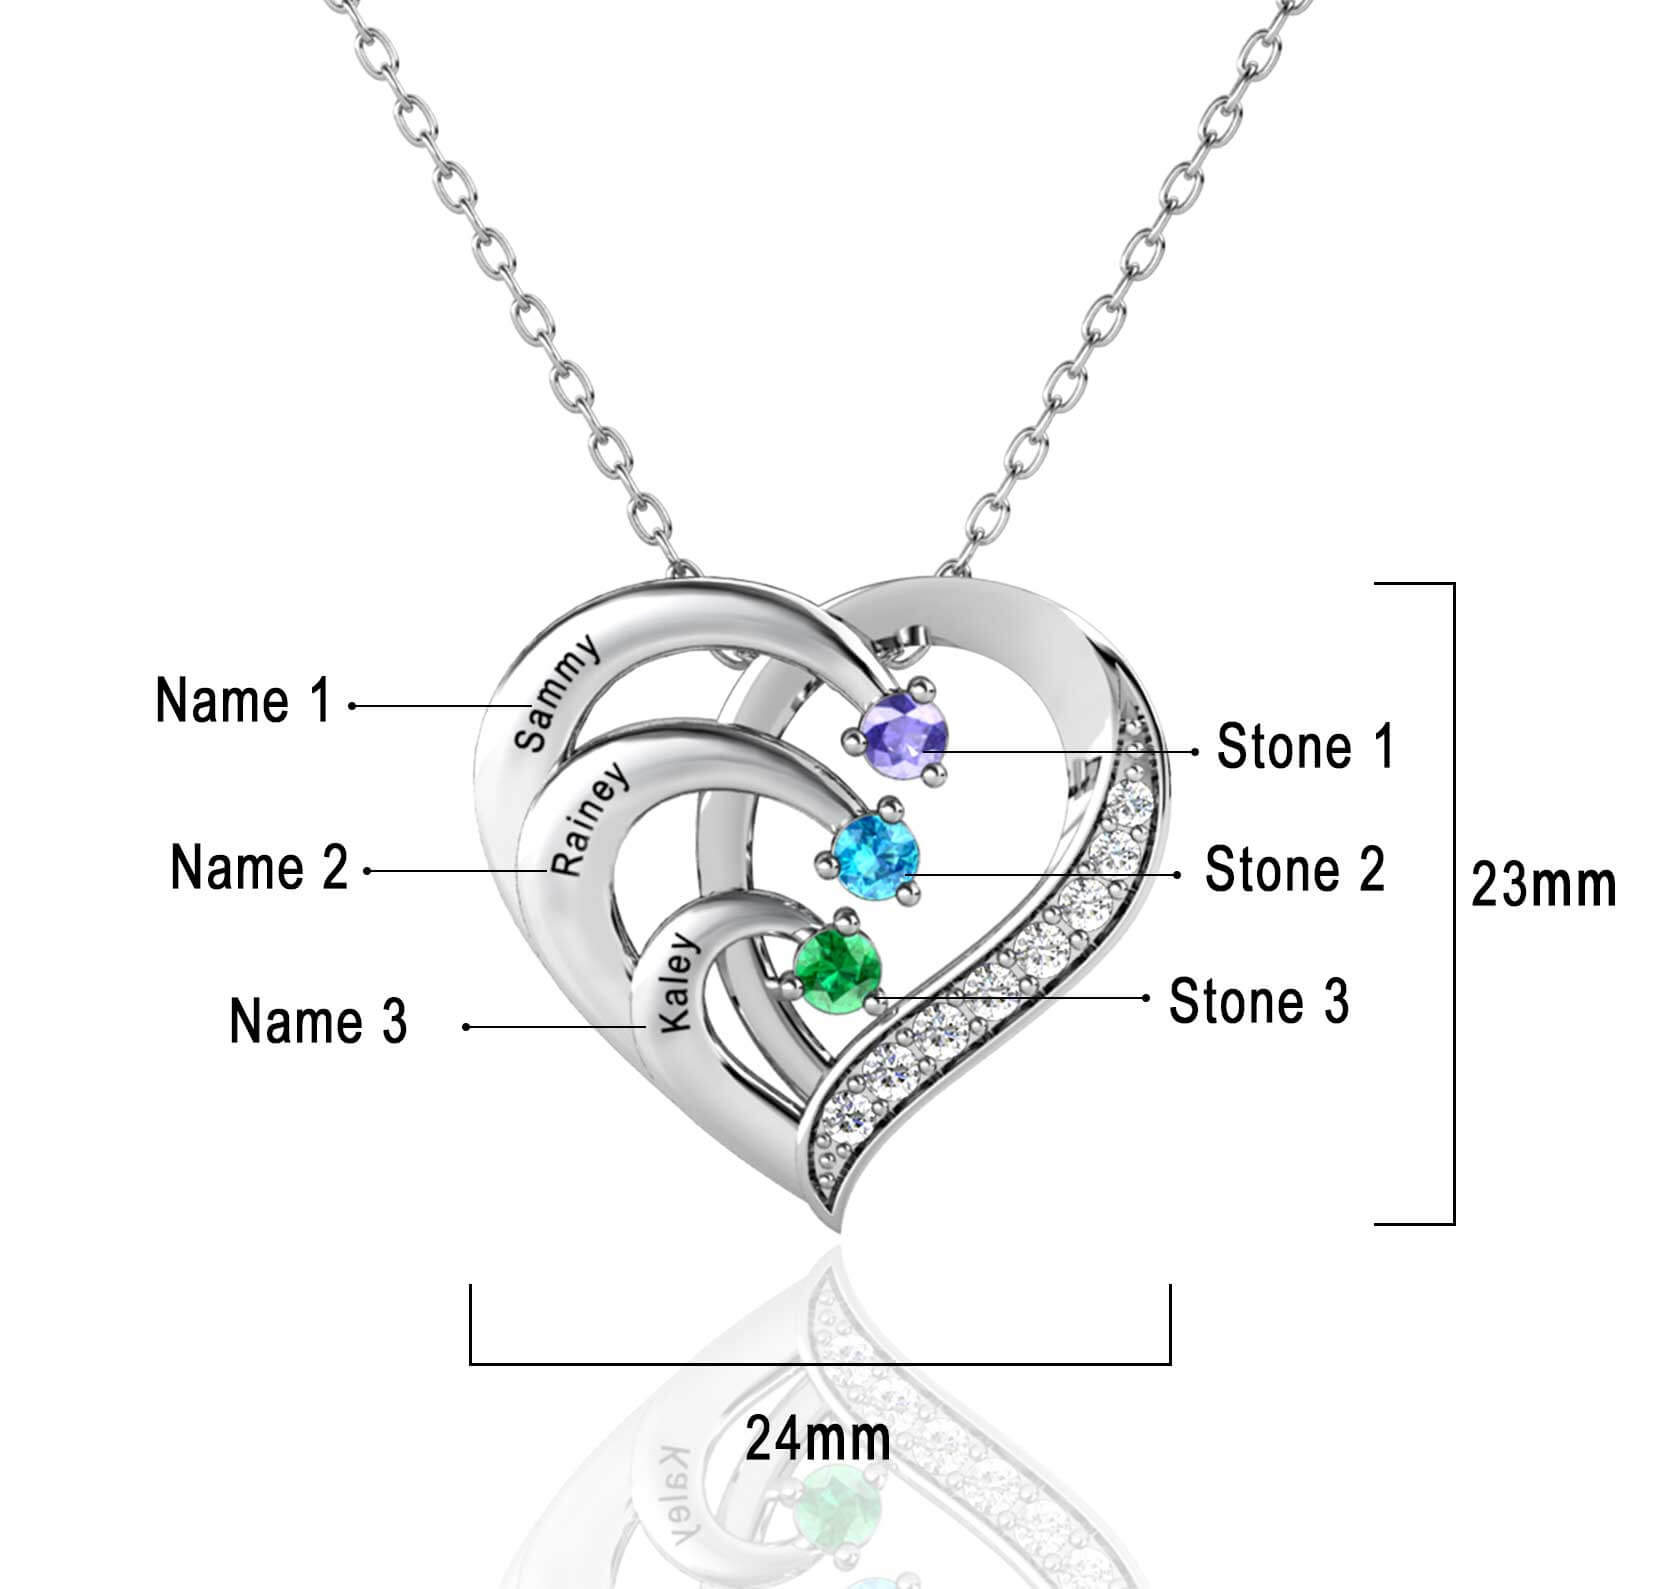 Jewelora Infinity Customized Mothers Necklaces With 3-5 Birthstones  Personalized Engraved Name Pendant Birthday Gifts For Women - Customized  Necklaces - AliExpress